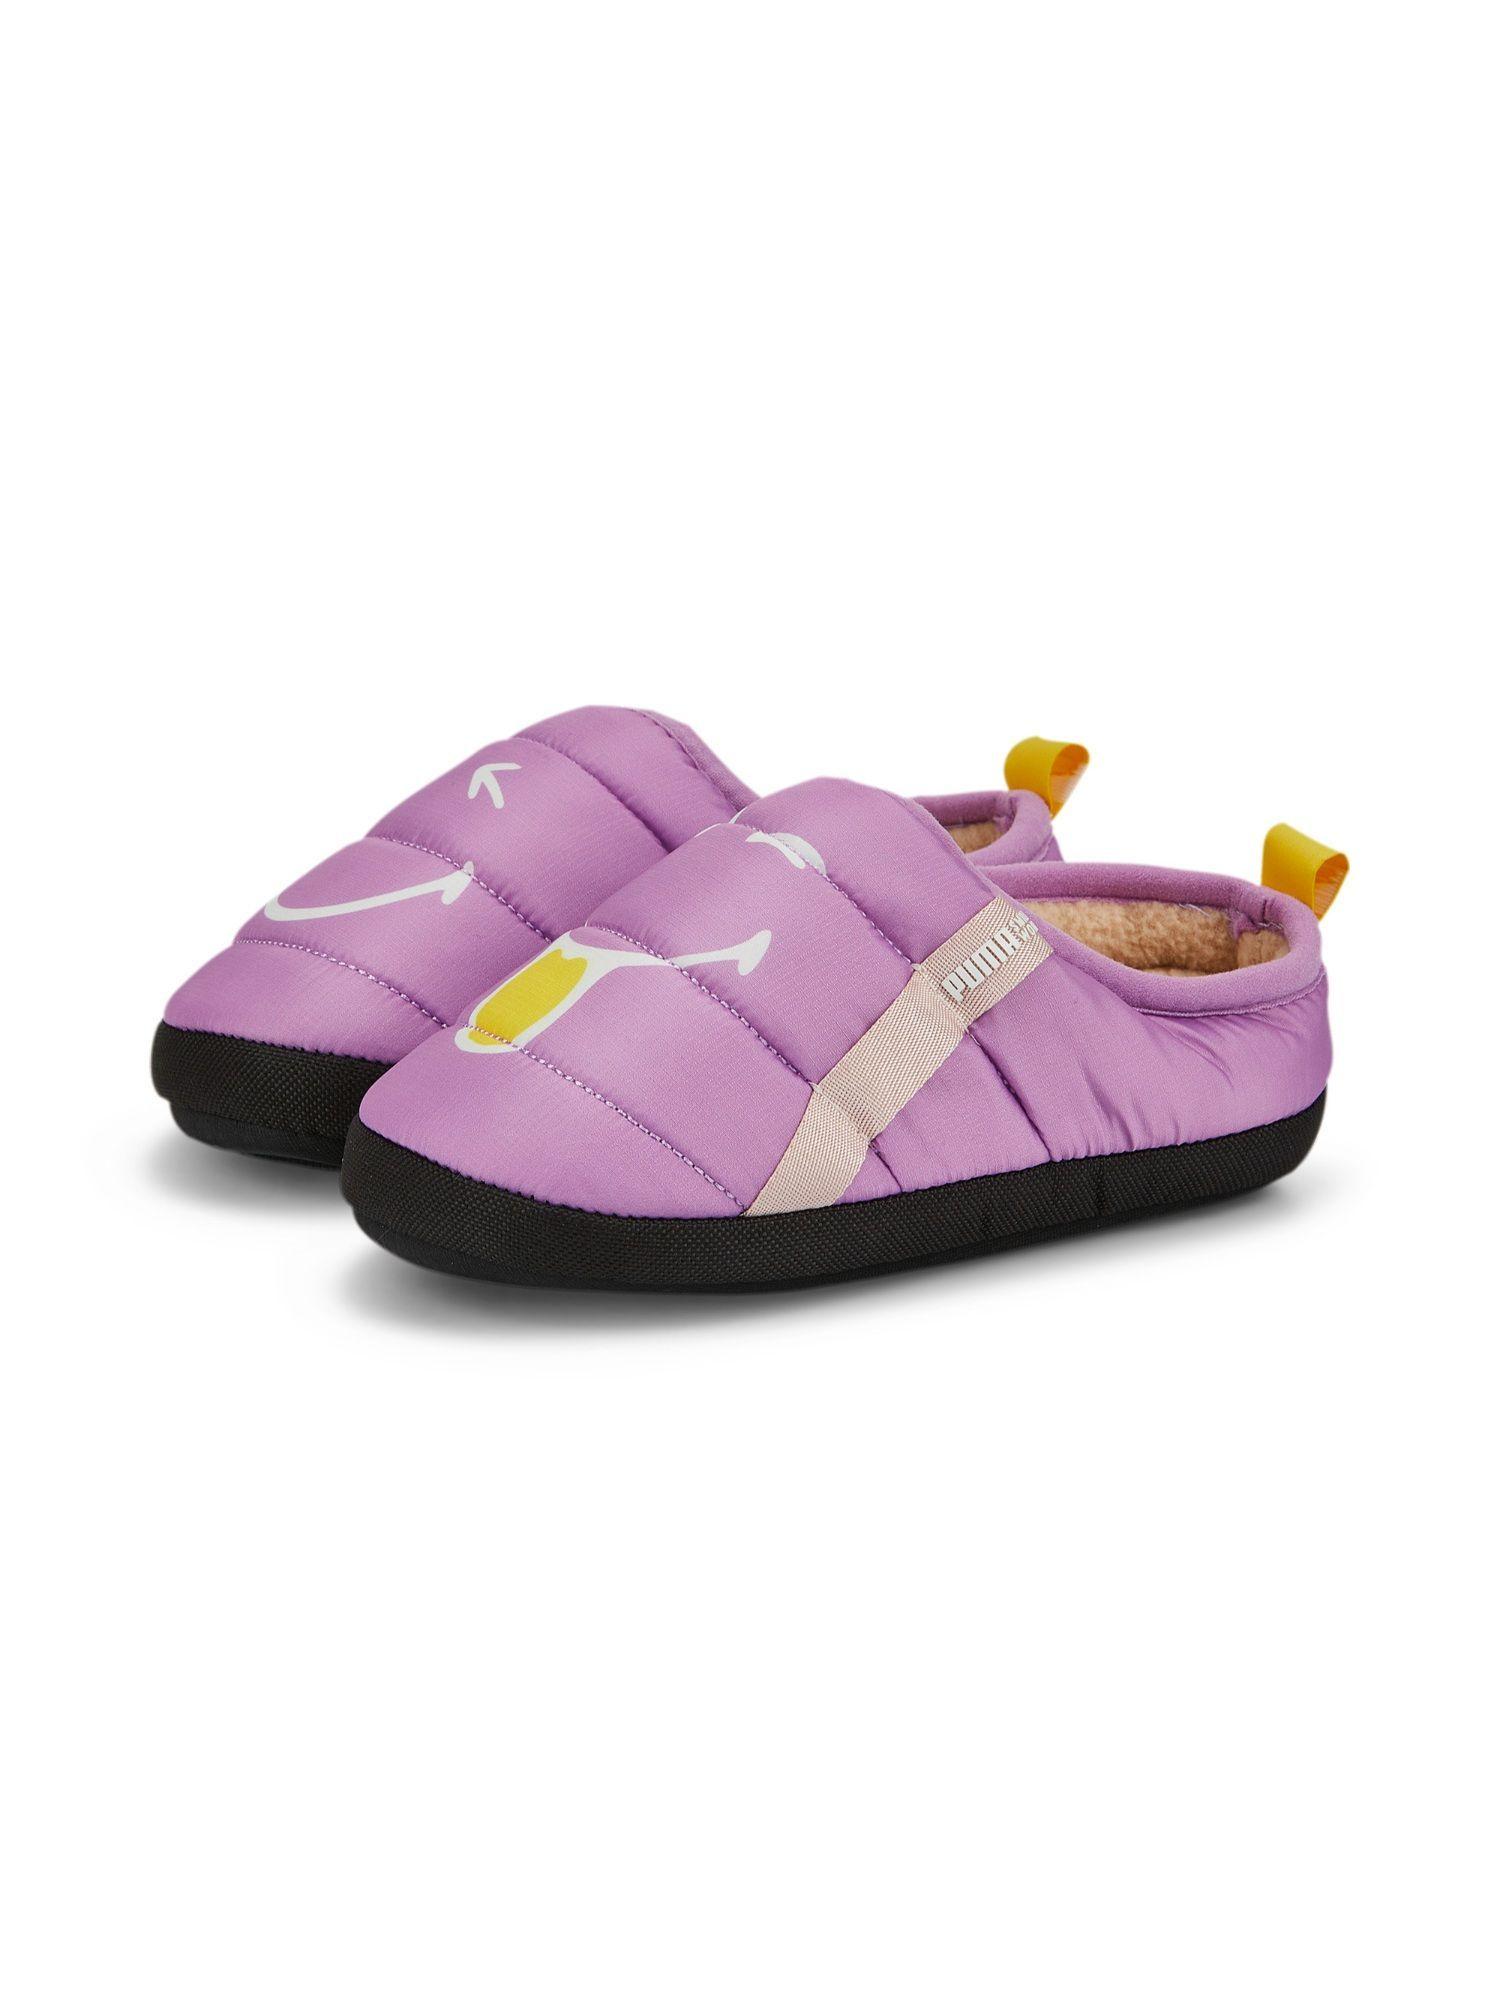 scuff-smileyworld-ps-kids-pink-clogs